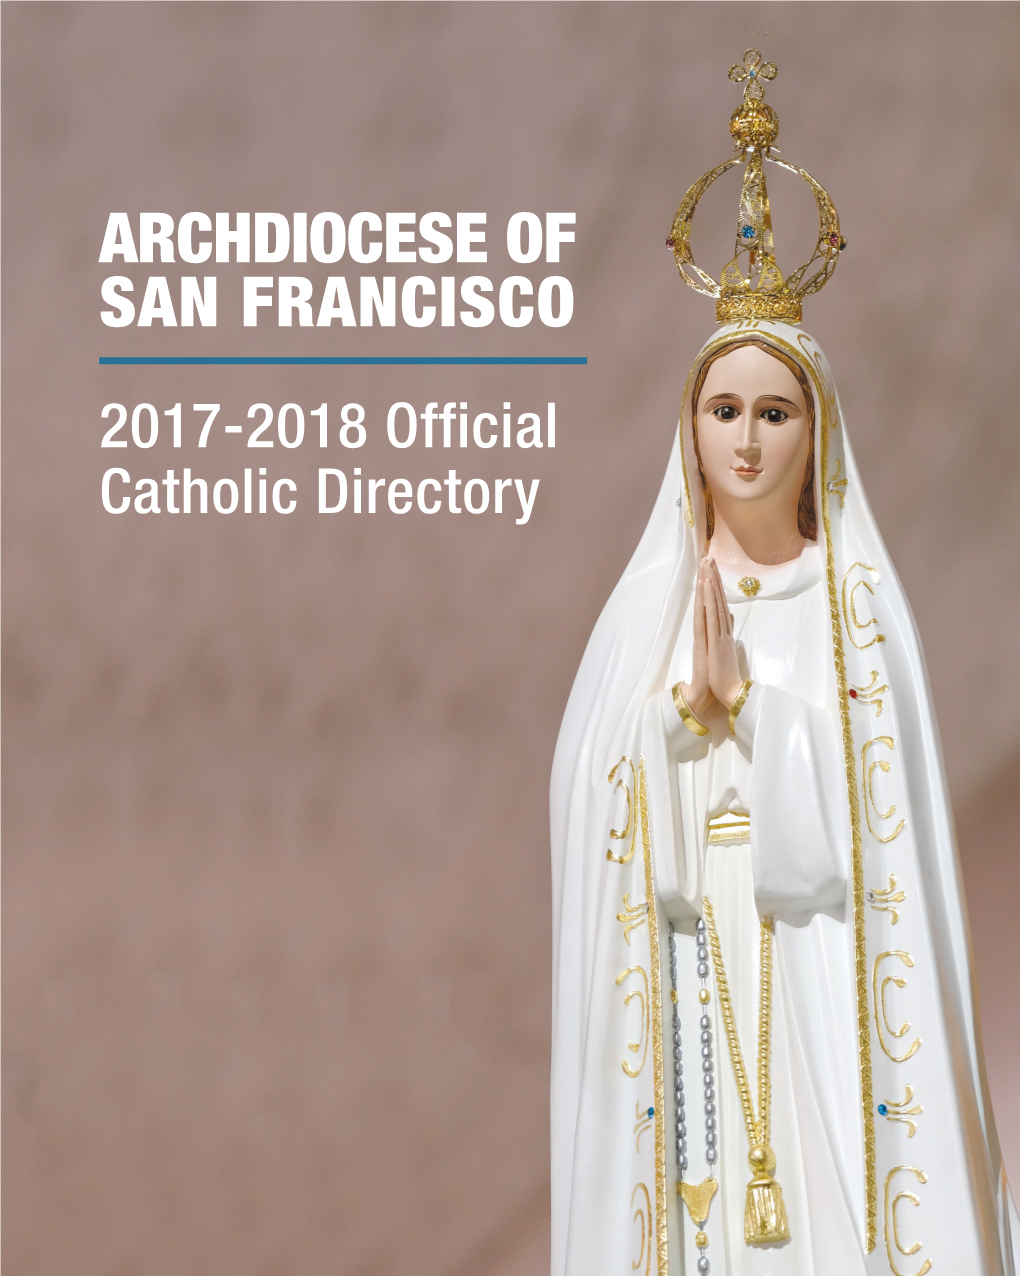 Archdiocese of San Francisco 2017-2018 Official Catholic Directory 2